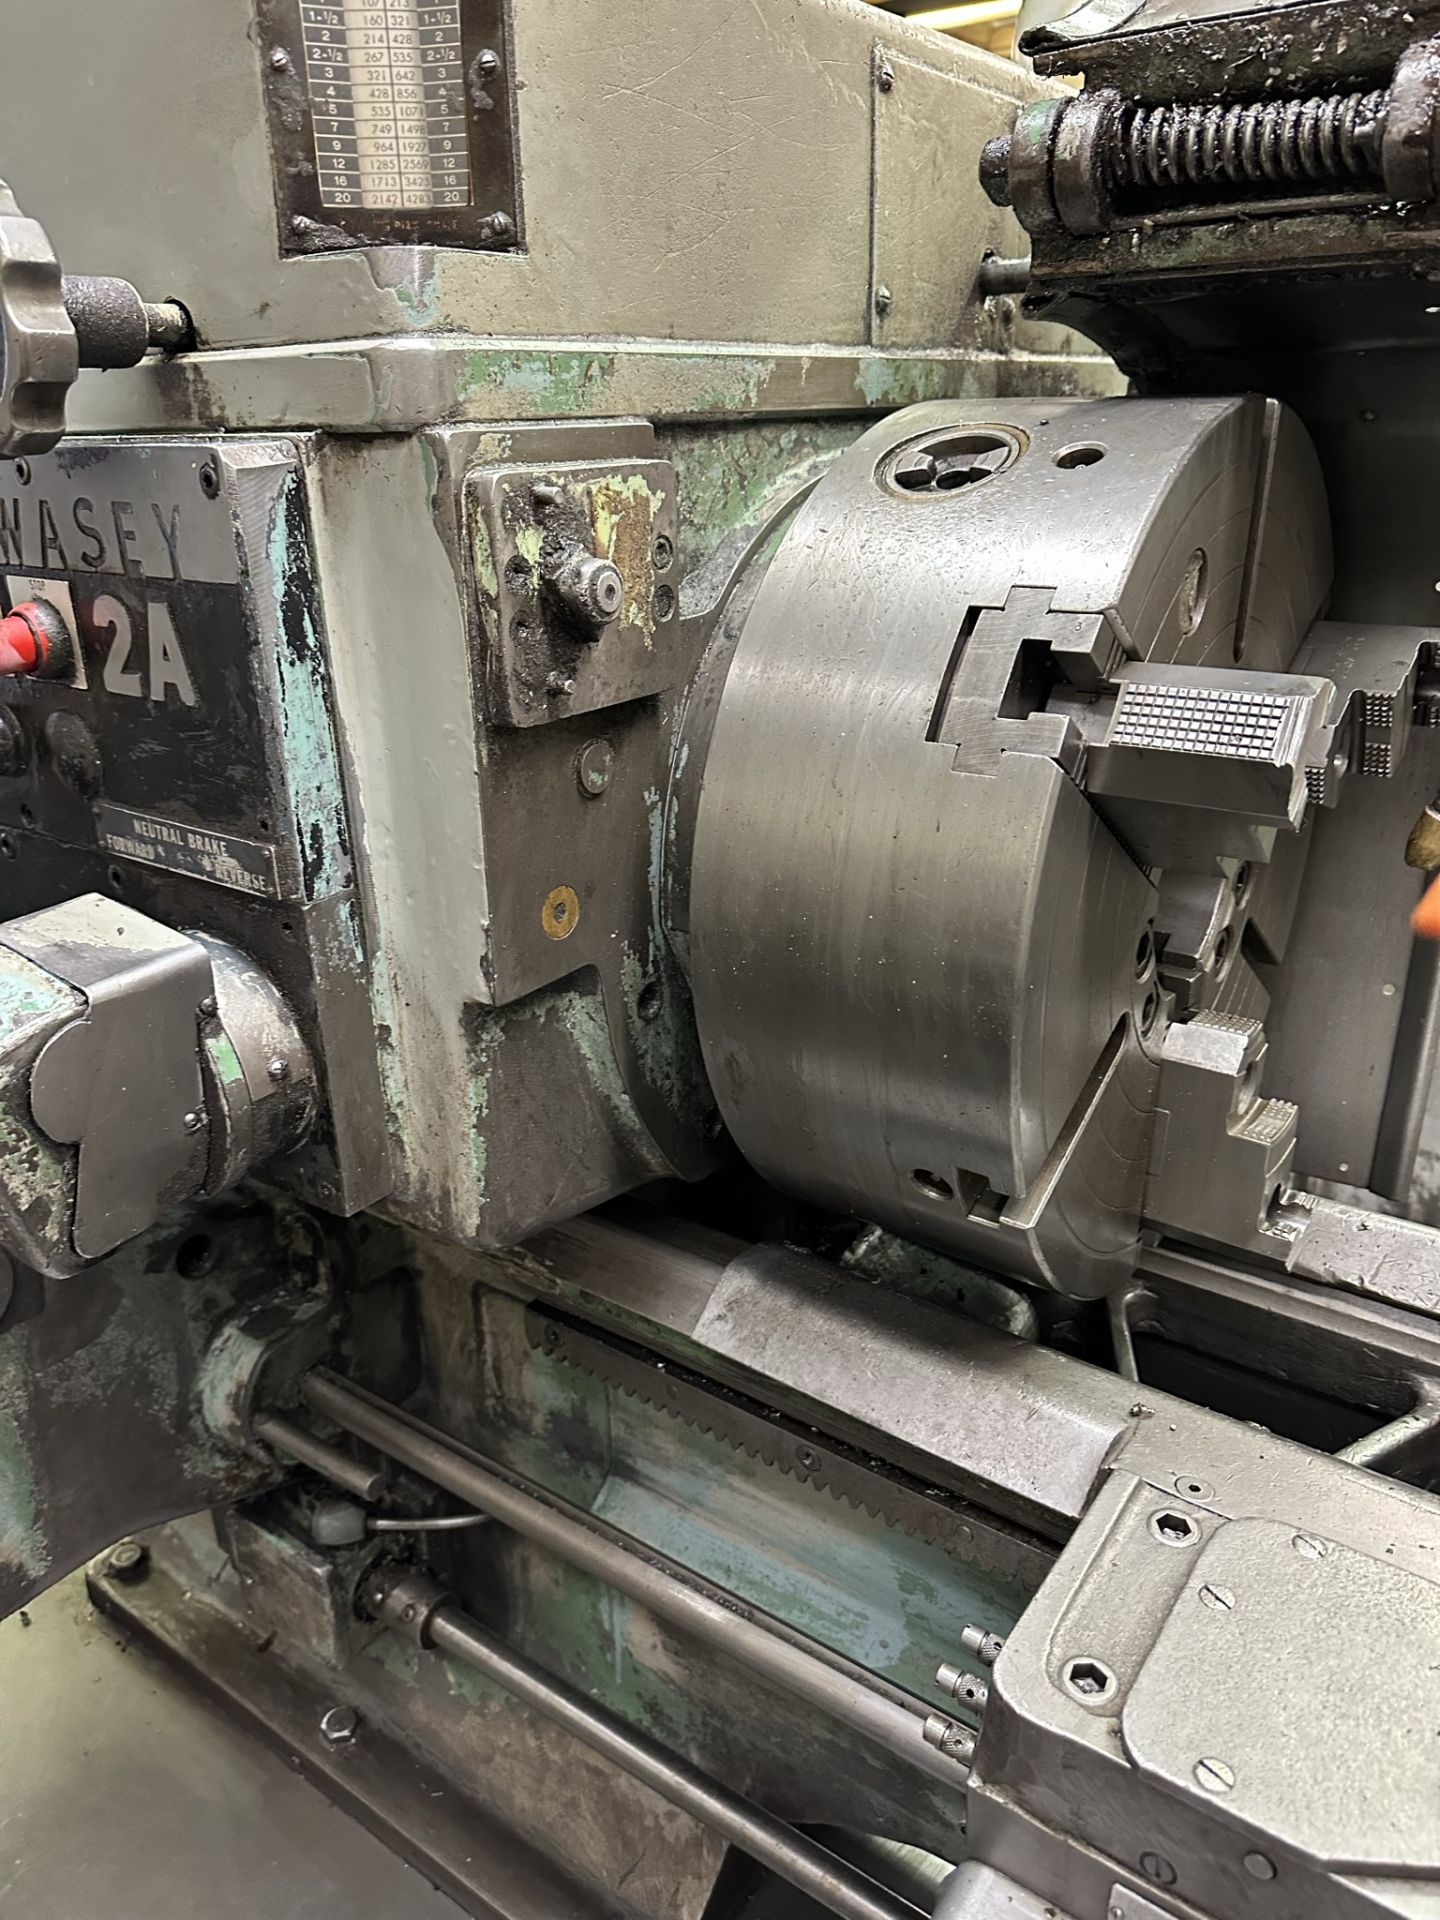 WARNER & SWASEY 2A M-3470 TURRET LATHE, 40 HP, 4-3/4" THROUGH HOLE, S/N 2289922, 18" 3-JAW CHUCK - Image 6 of 18